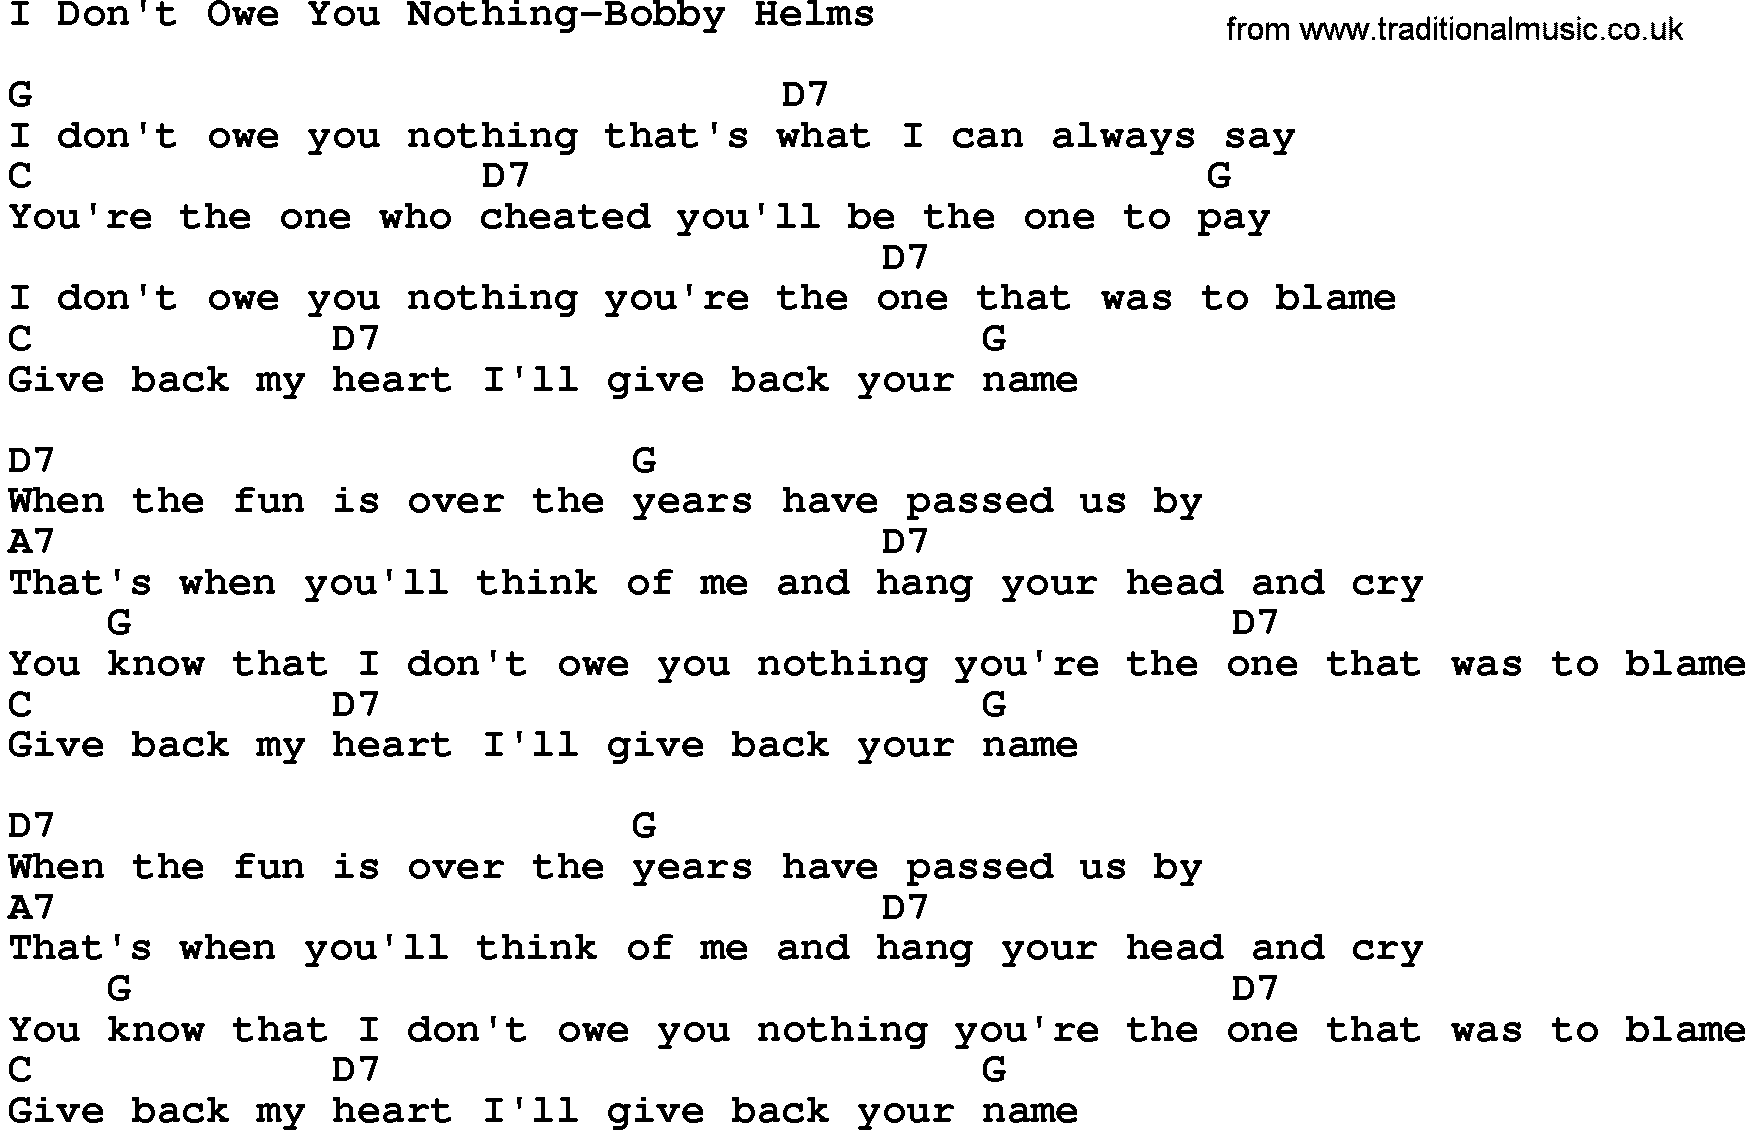 Country music song: I Don't Owe You Nothing-Bobby Helms lyrics and chords